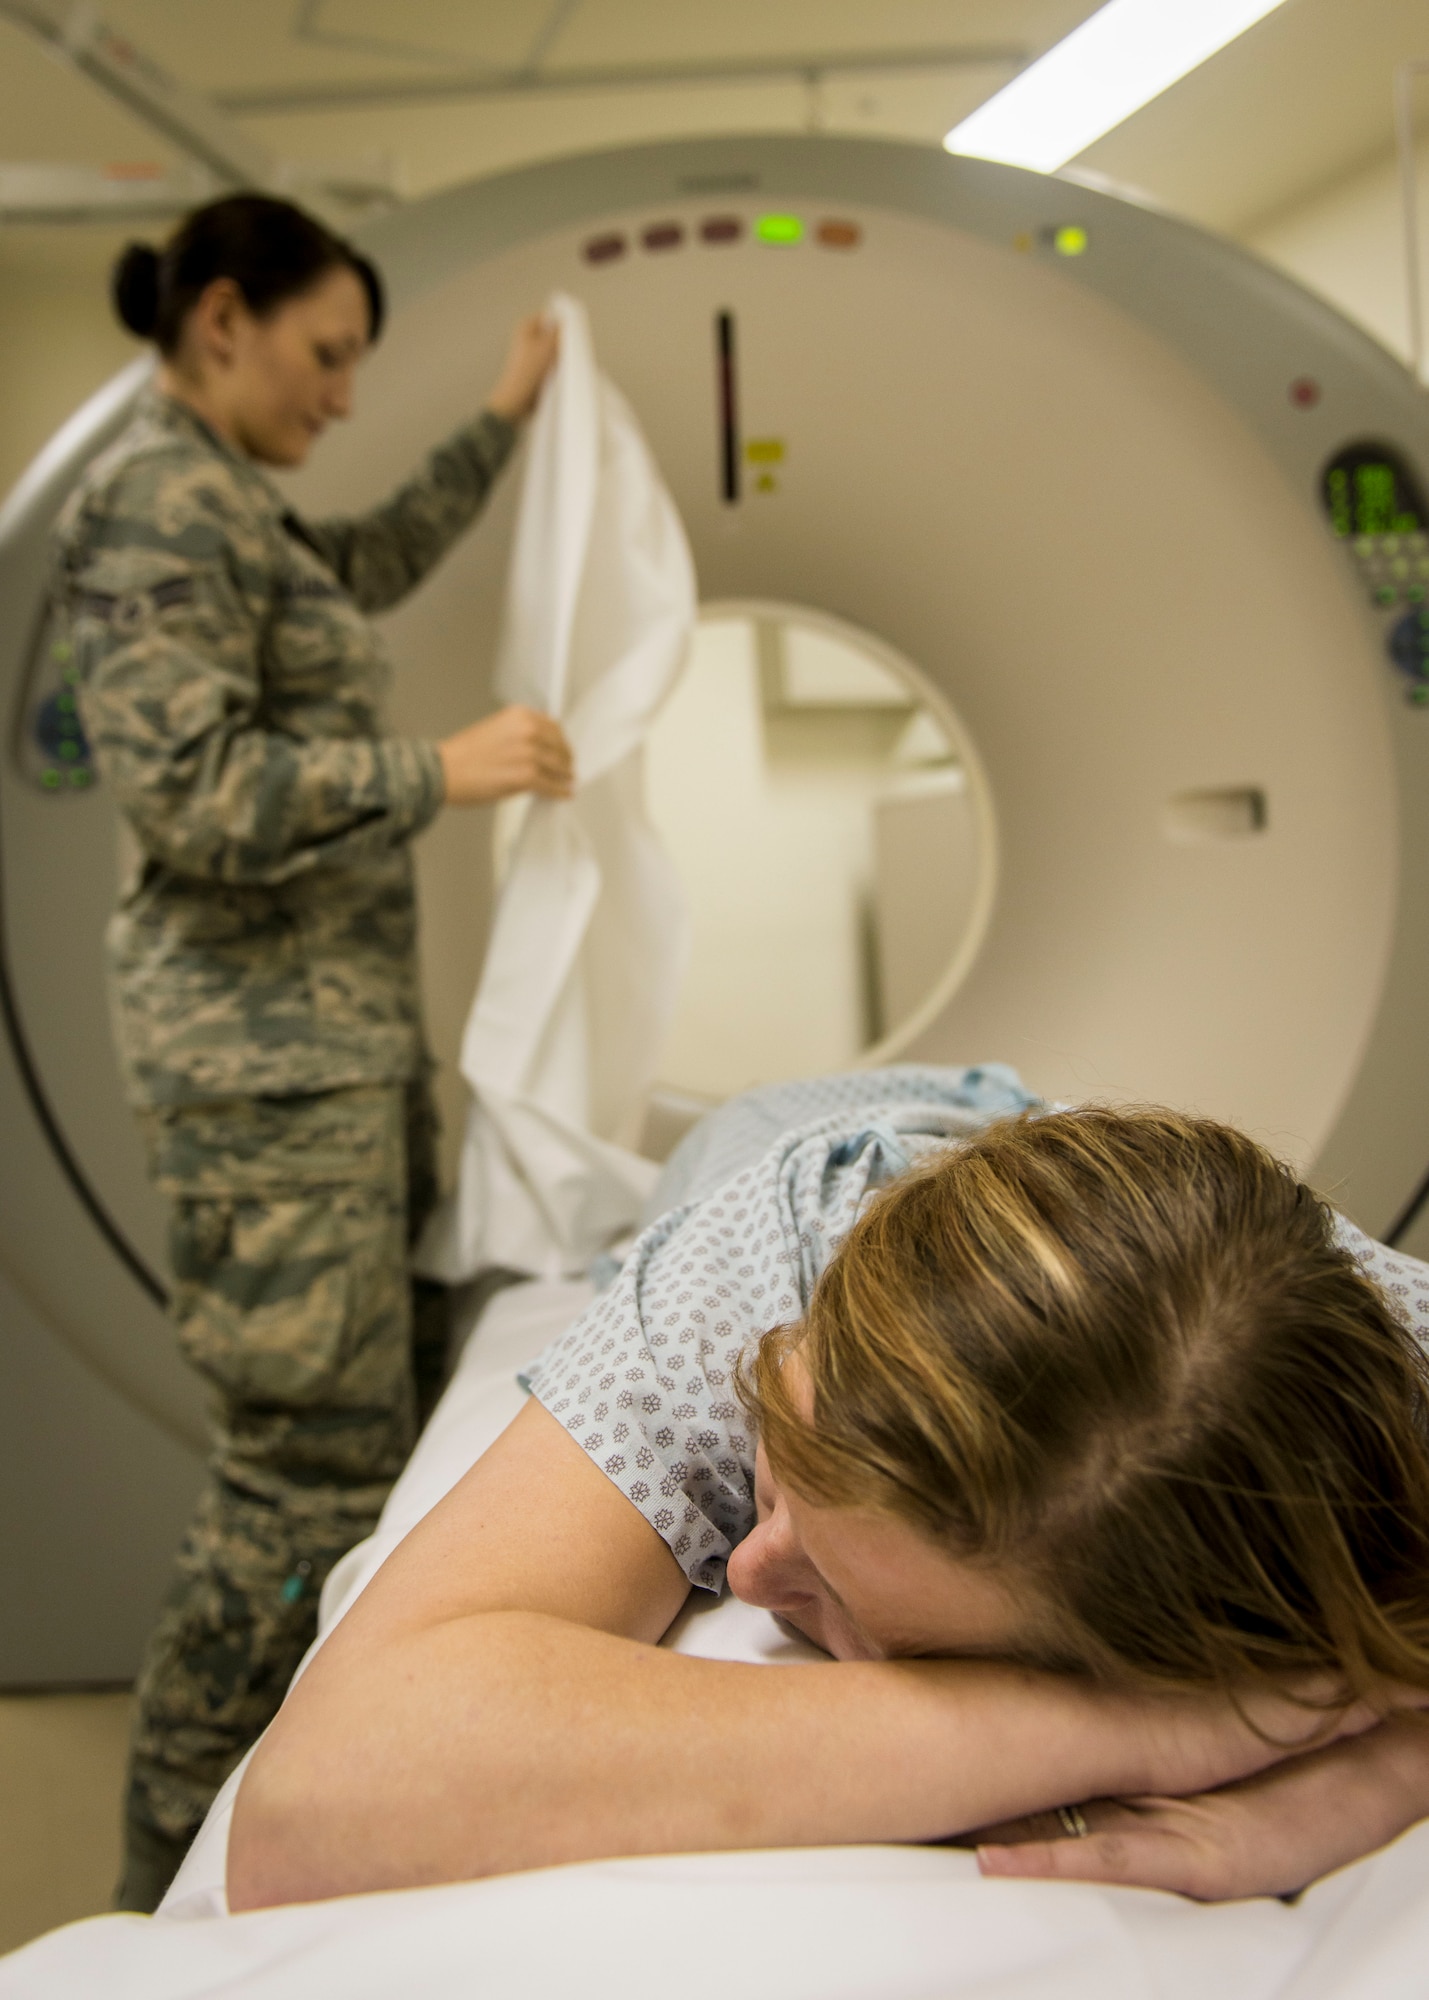 U.S. Air Force Airman 1st Class Samantha Bradford, a diagnostic imaging technologist with the 35th Surgical Operations Squadron, covers a kidney stone patient as she prepares her for a computerized tomography scan at Misawa Air Base, Japan, Jan. 27, 2016. The CT scan will provide a 3-D view of the patient’s bones and internal organs including her urinary system. The high resolution scan allows Bradford to see the stones and their exact locations so the physicians know precisely where to create an incision for extraction. Bradford is a Corinth, Maine, native. (U.S. Air Force photo by Staff Sgt. Benjamin W. Stratton)